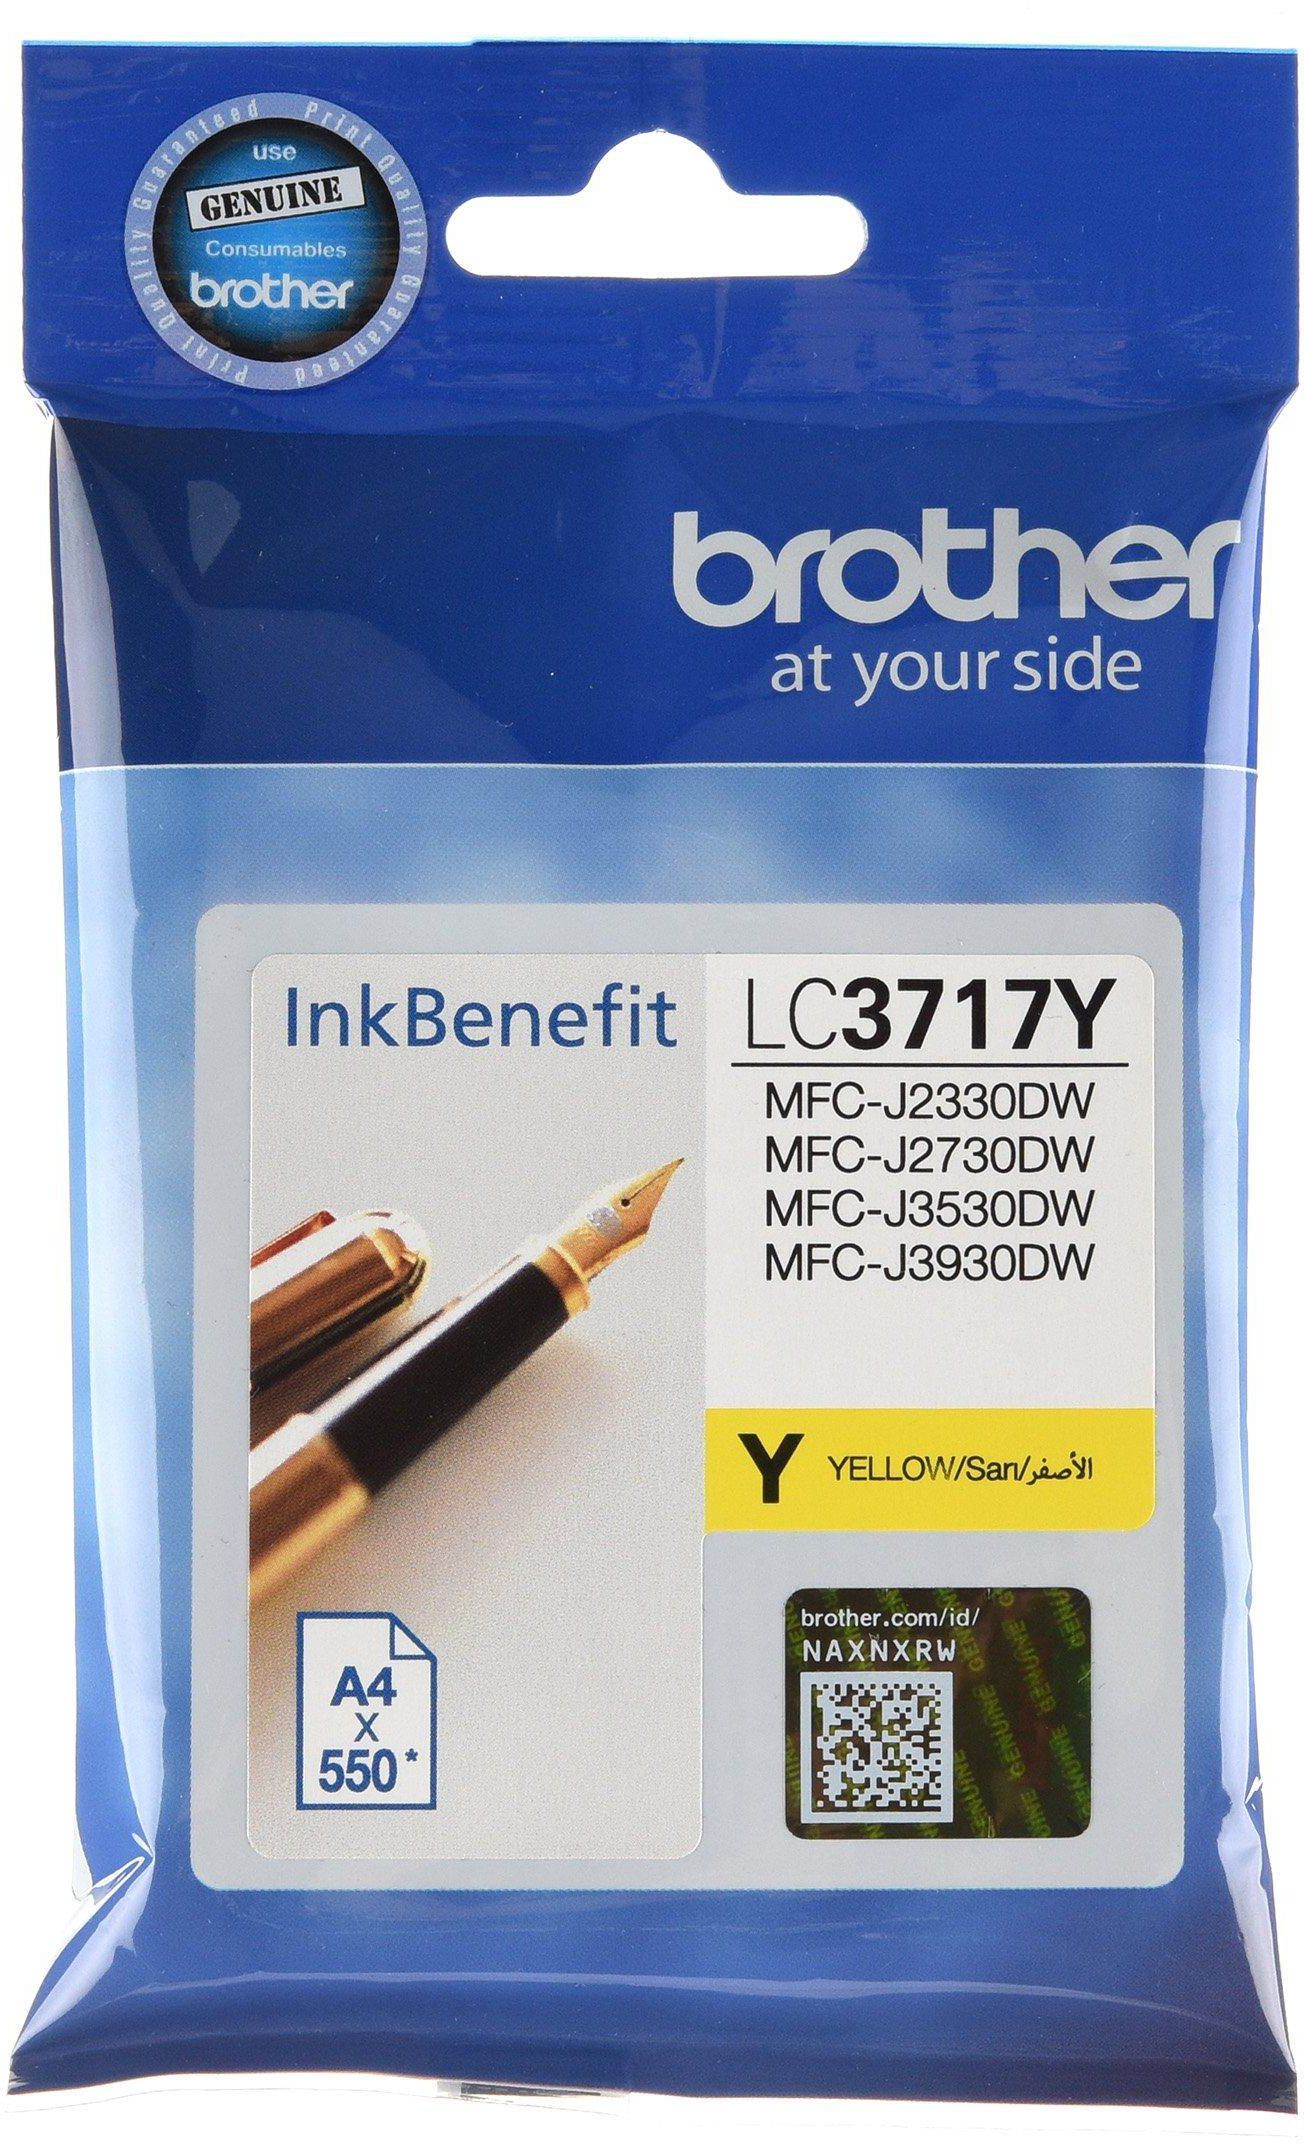 BROTHER Yellow Ink Cartridge For Brother Printer, yield is 550 Pages